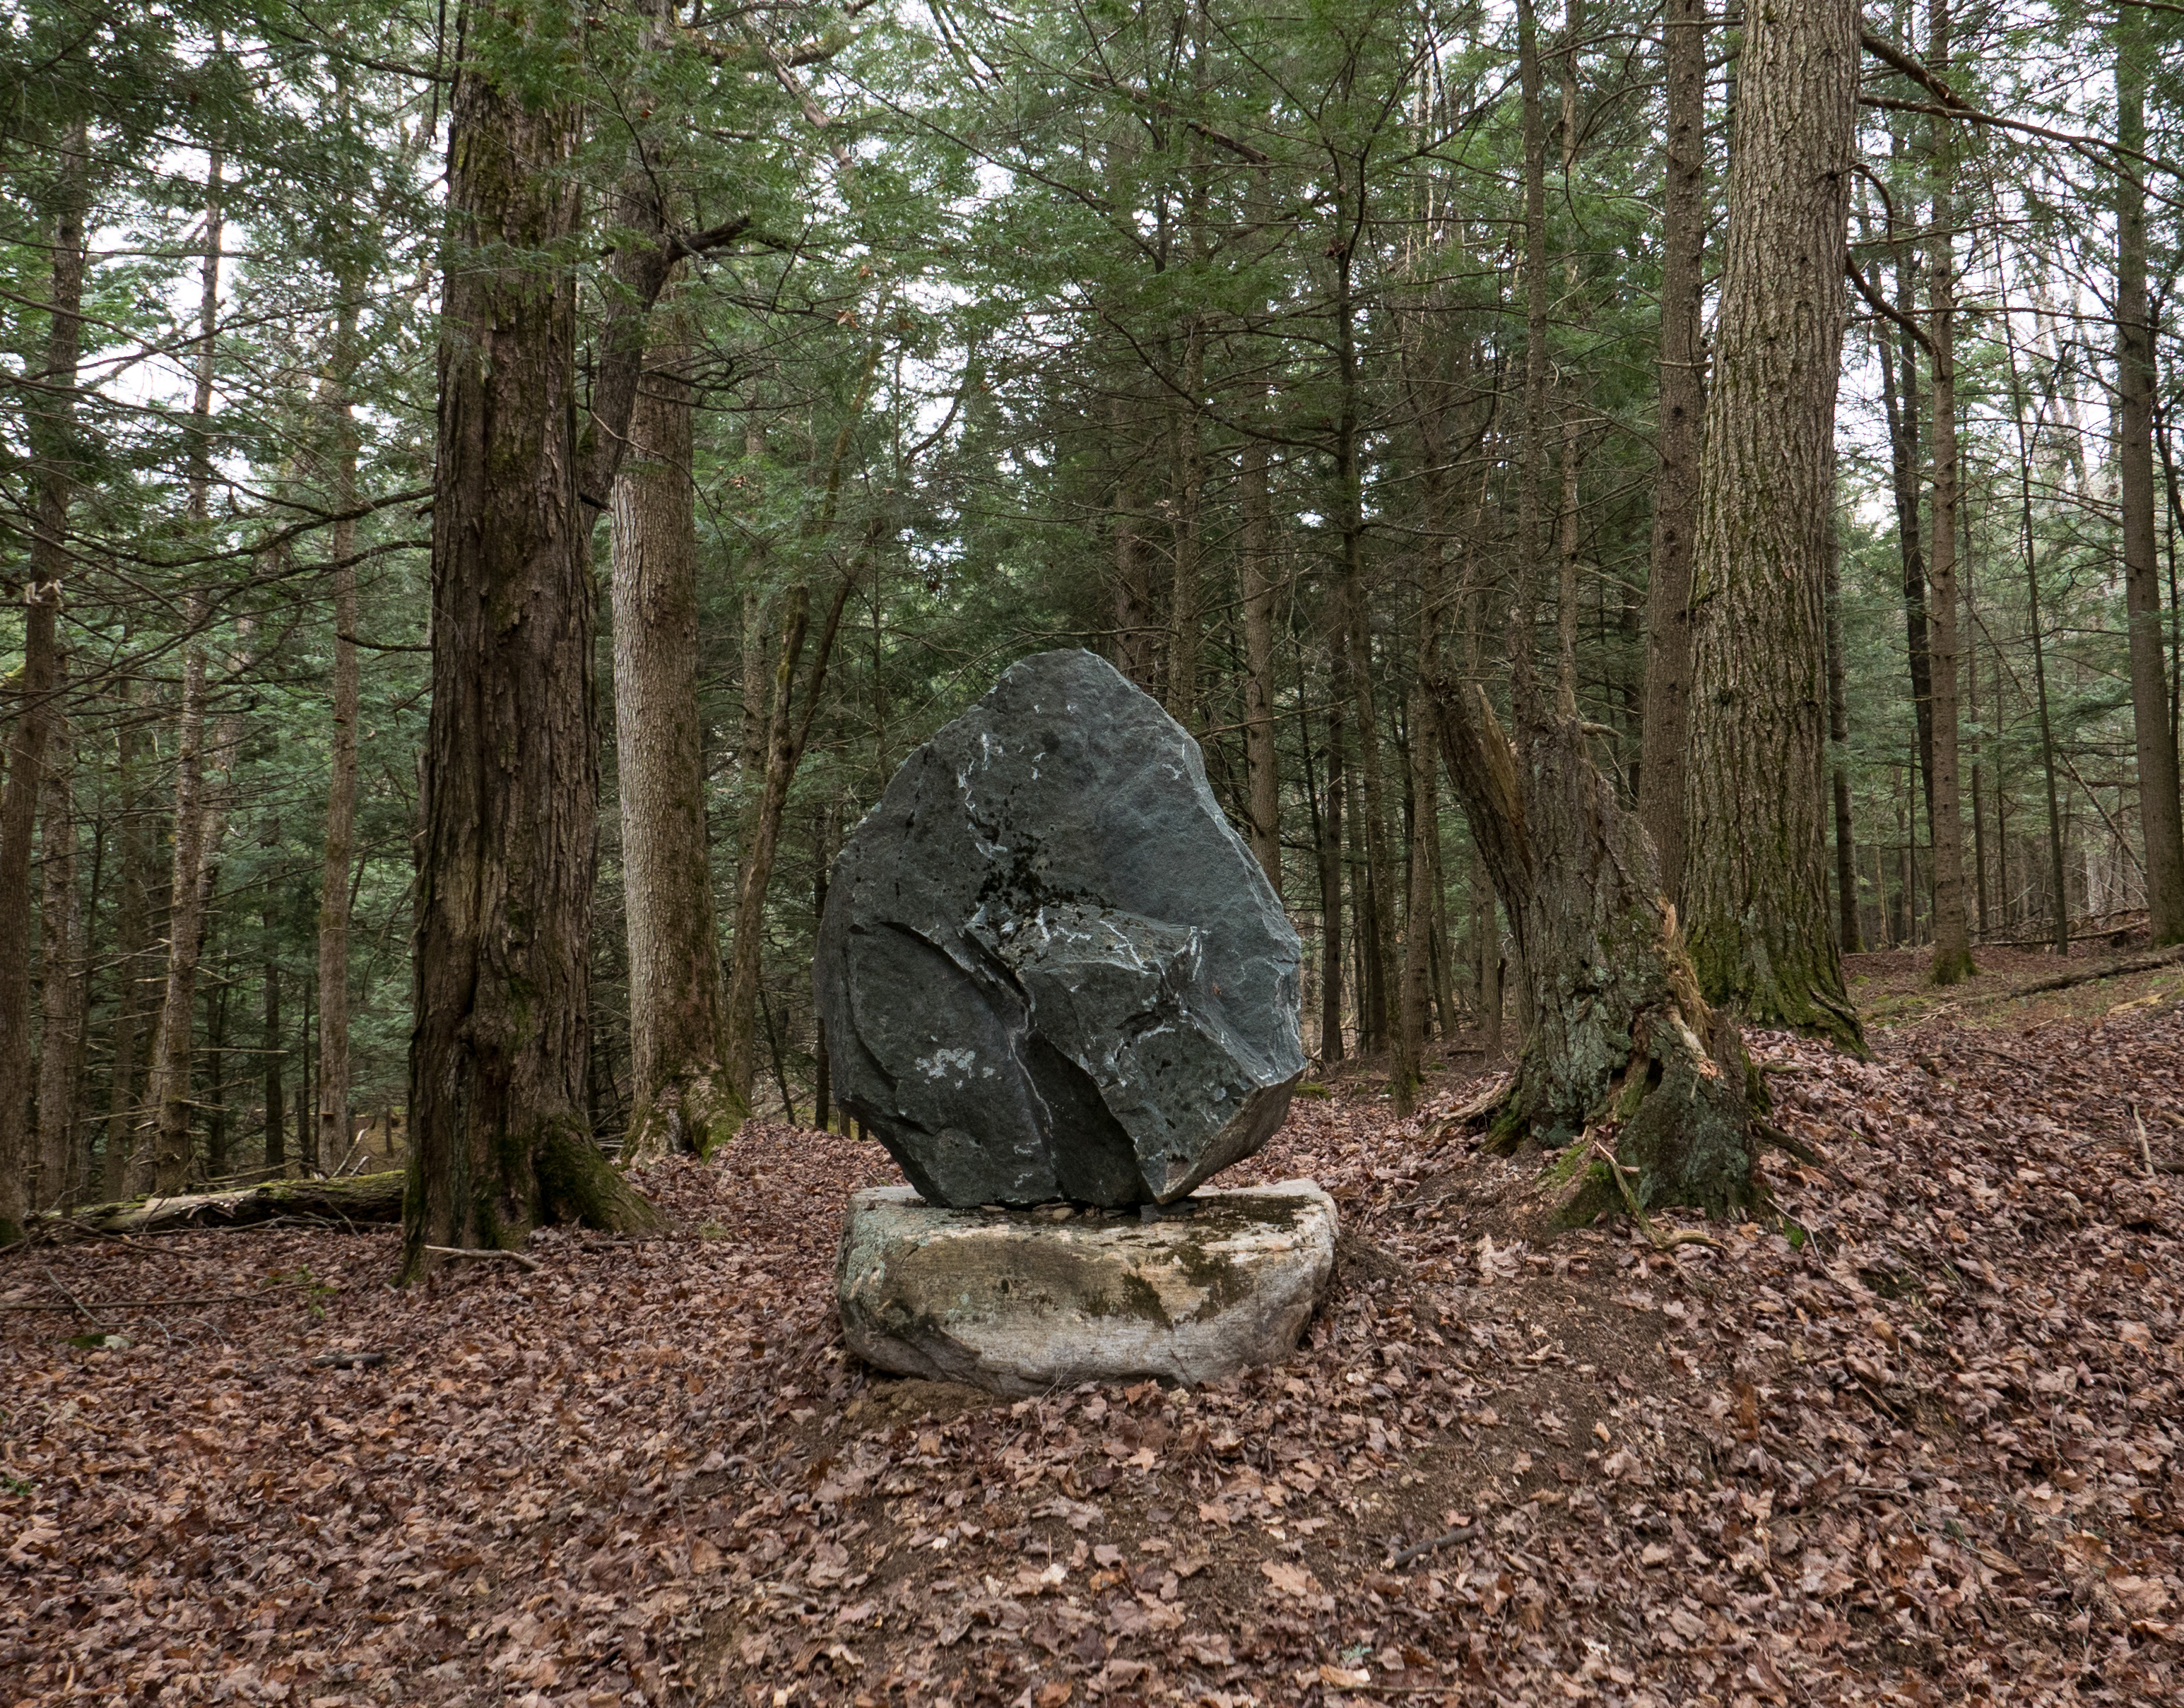 Talk about serendipity! What looks like a base for a sculpture was a rock actually in that exact spot. 